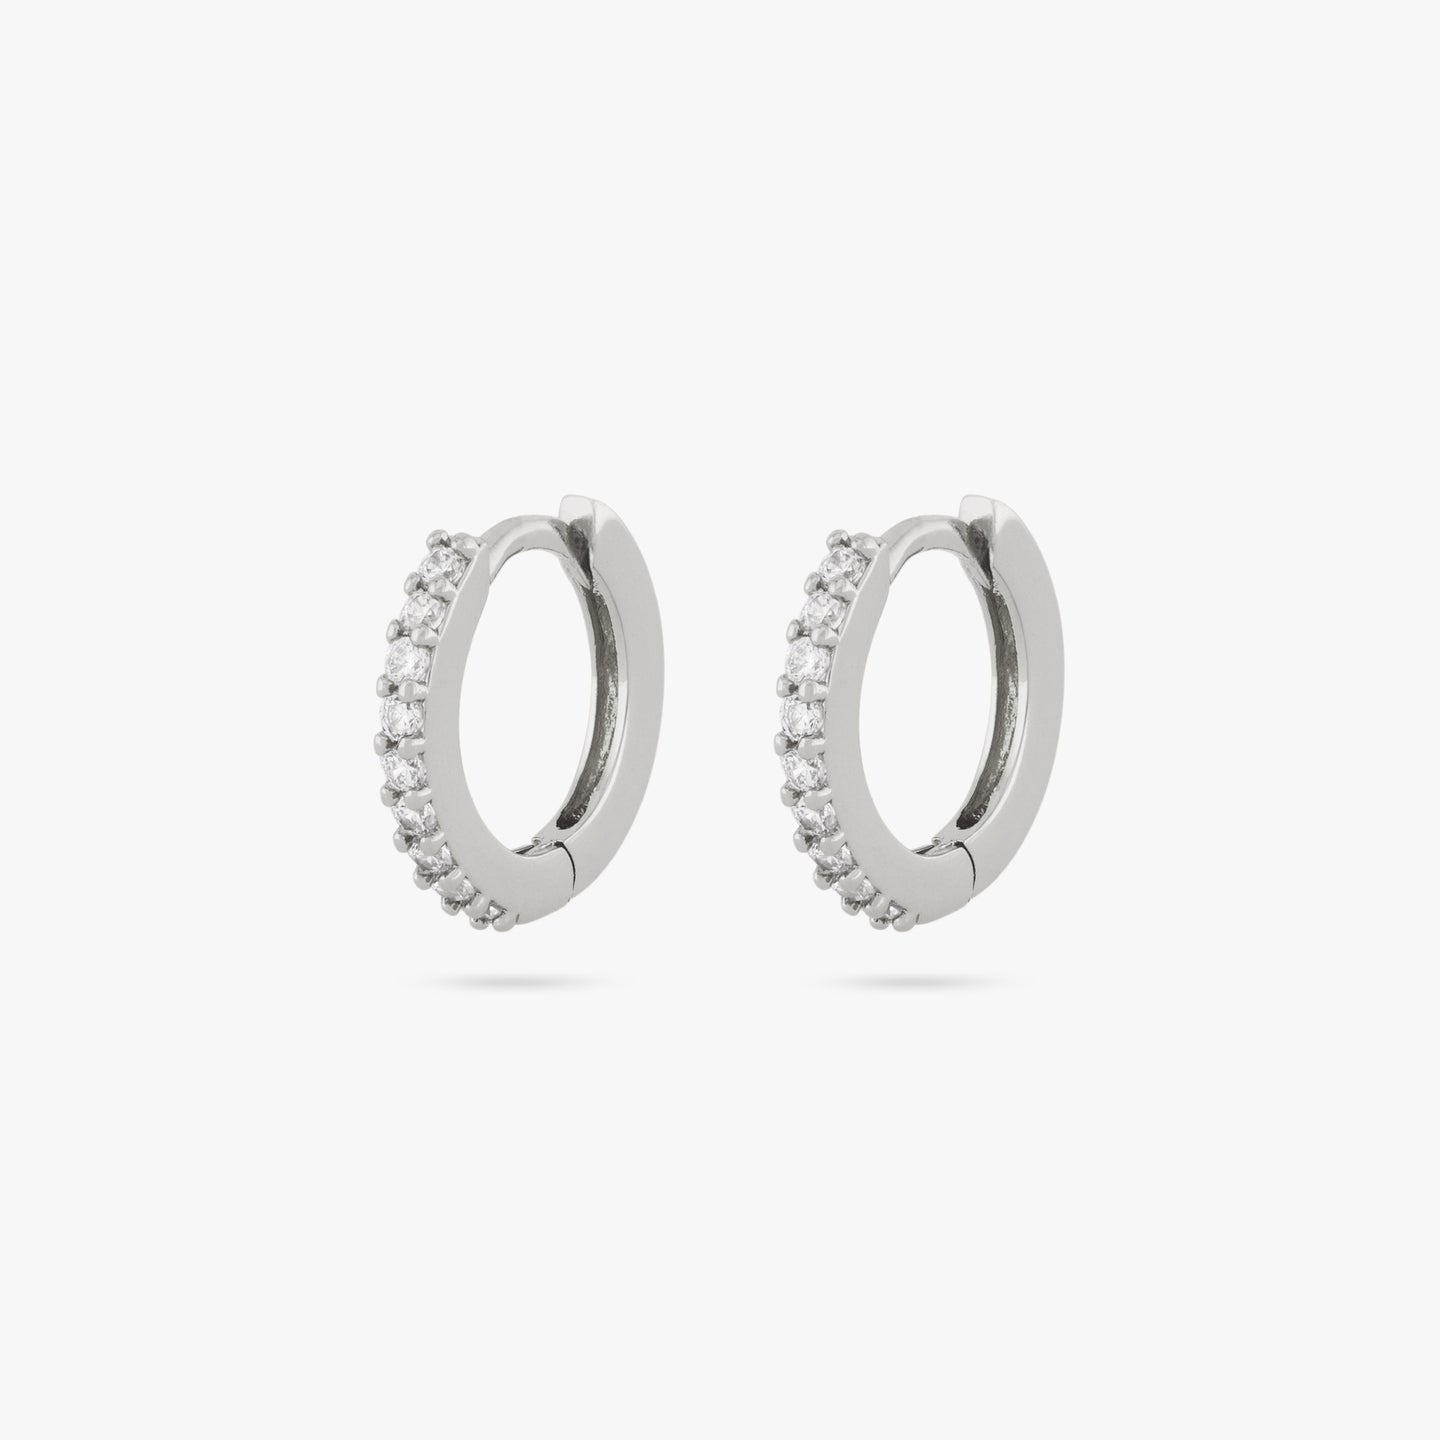 A pair of mini silver huggies lined with clear cz gems on the front [pair] color:null|silver/clear